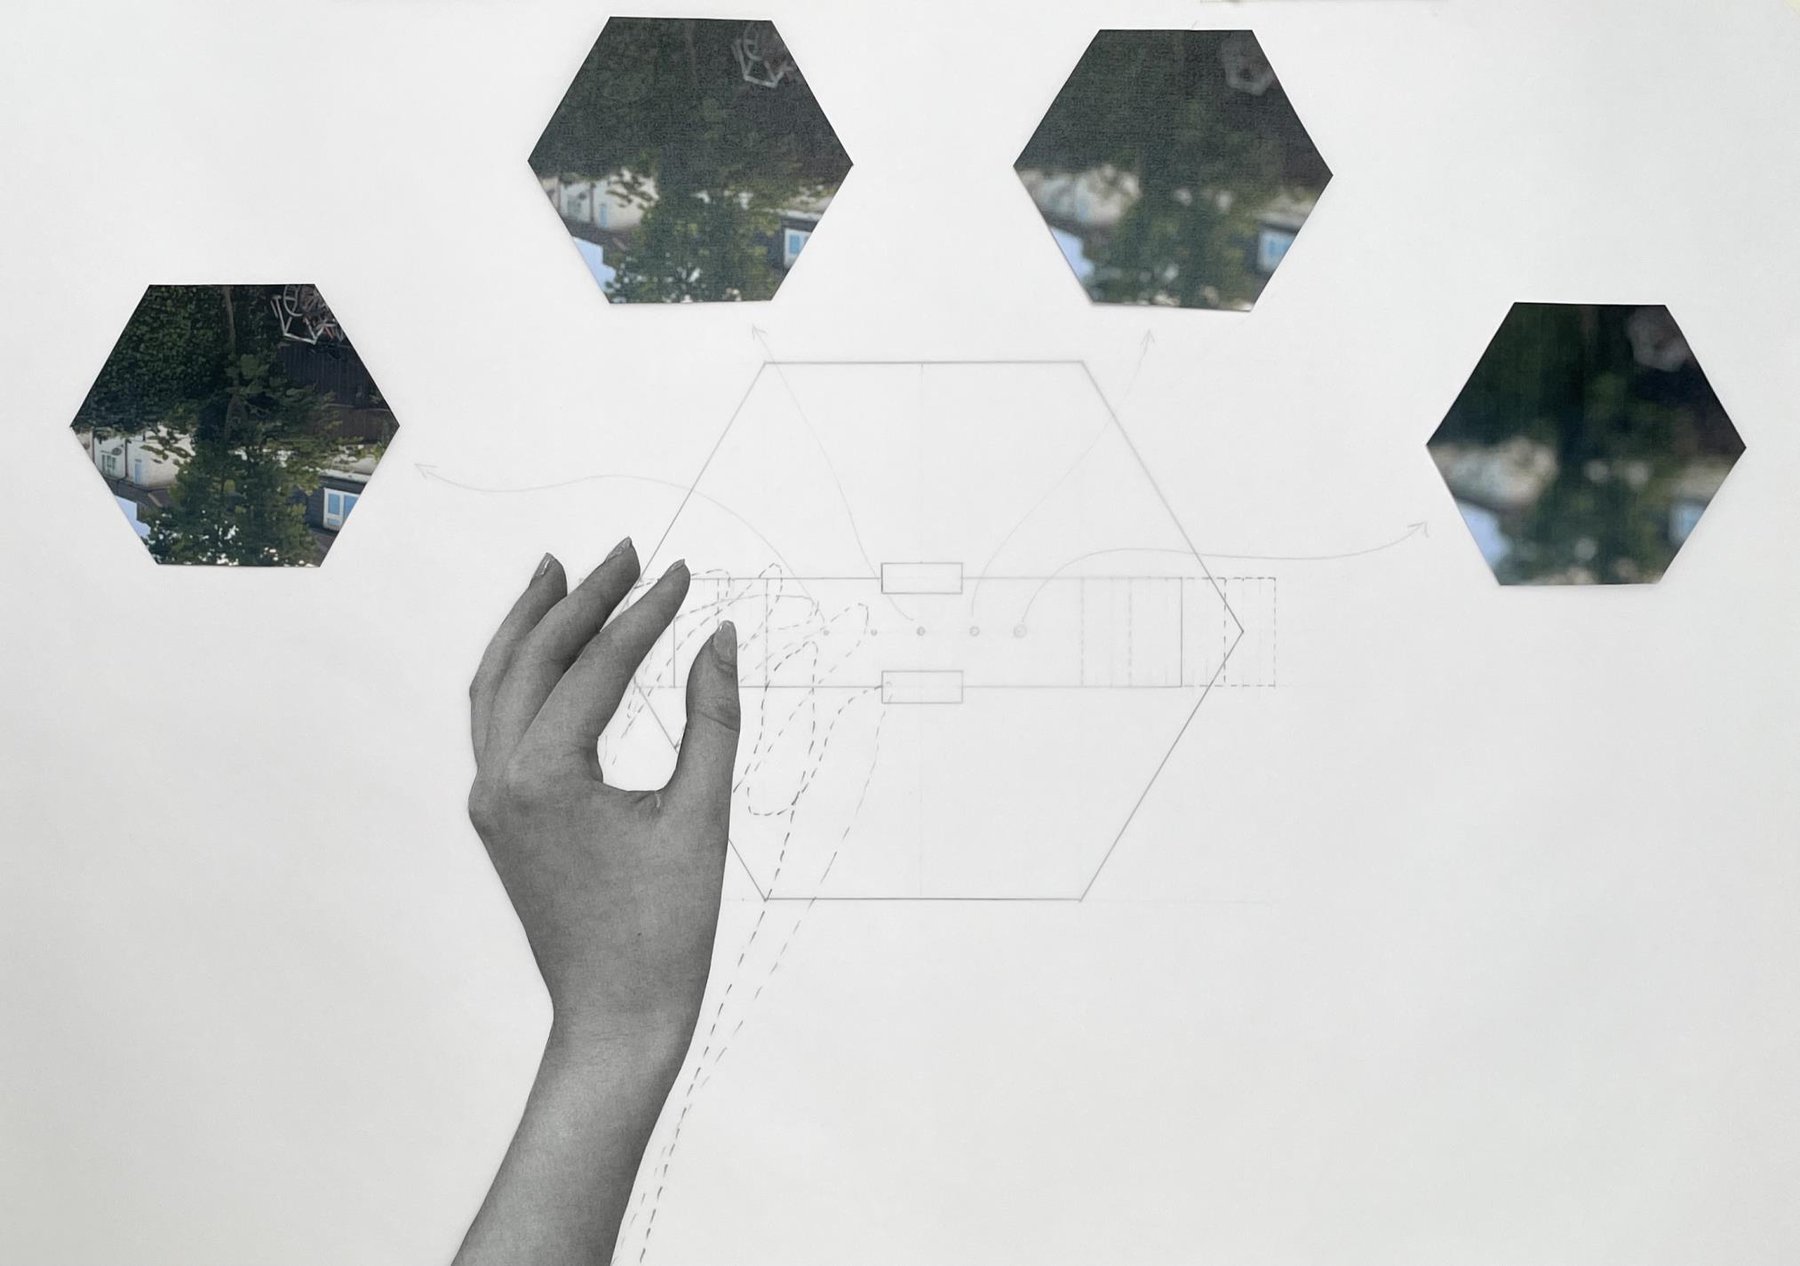 Composite drawing made of pencil drawings and collage showing a hand manipulating a hexagonal object so that 4 separate images appear as a result. Each image is gradually more blurry, indicating that the hand can control the amount of clarity